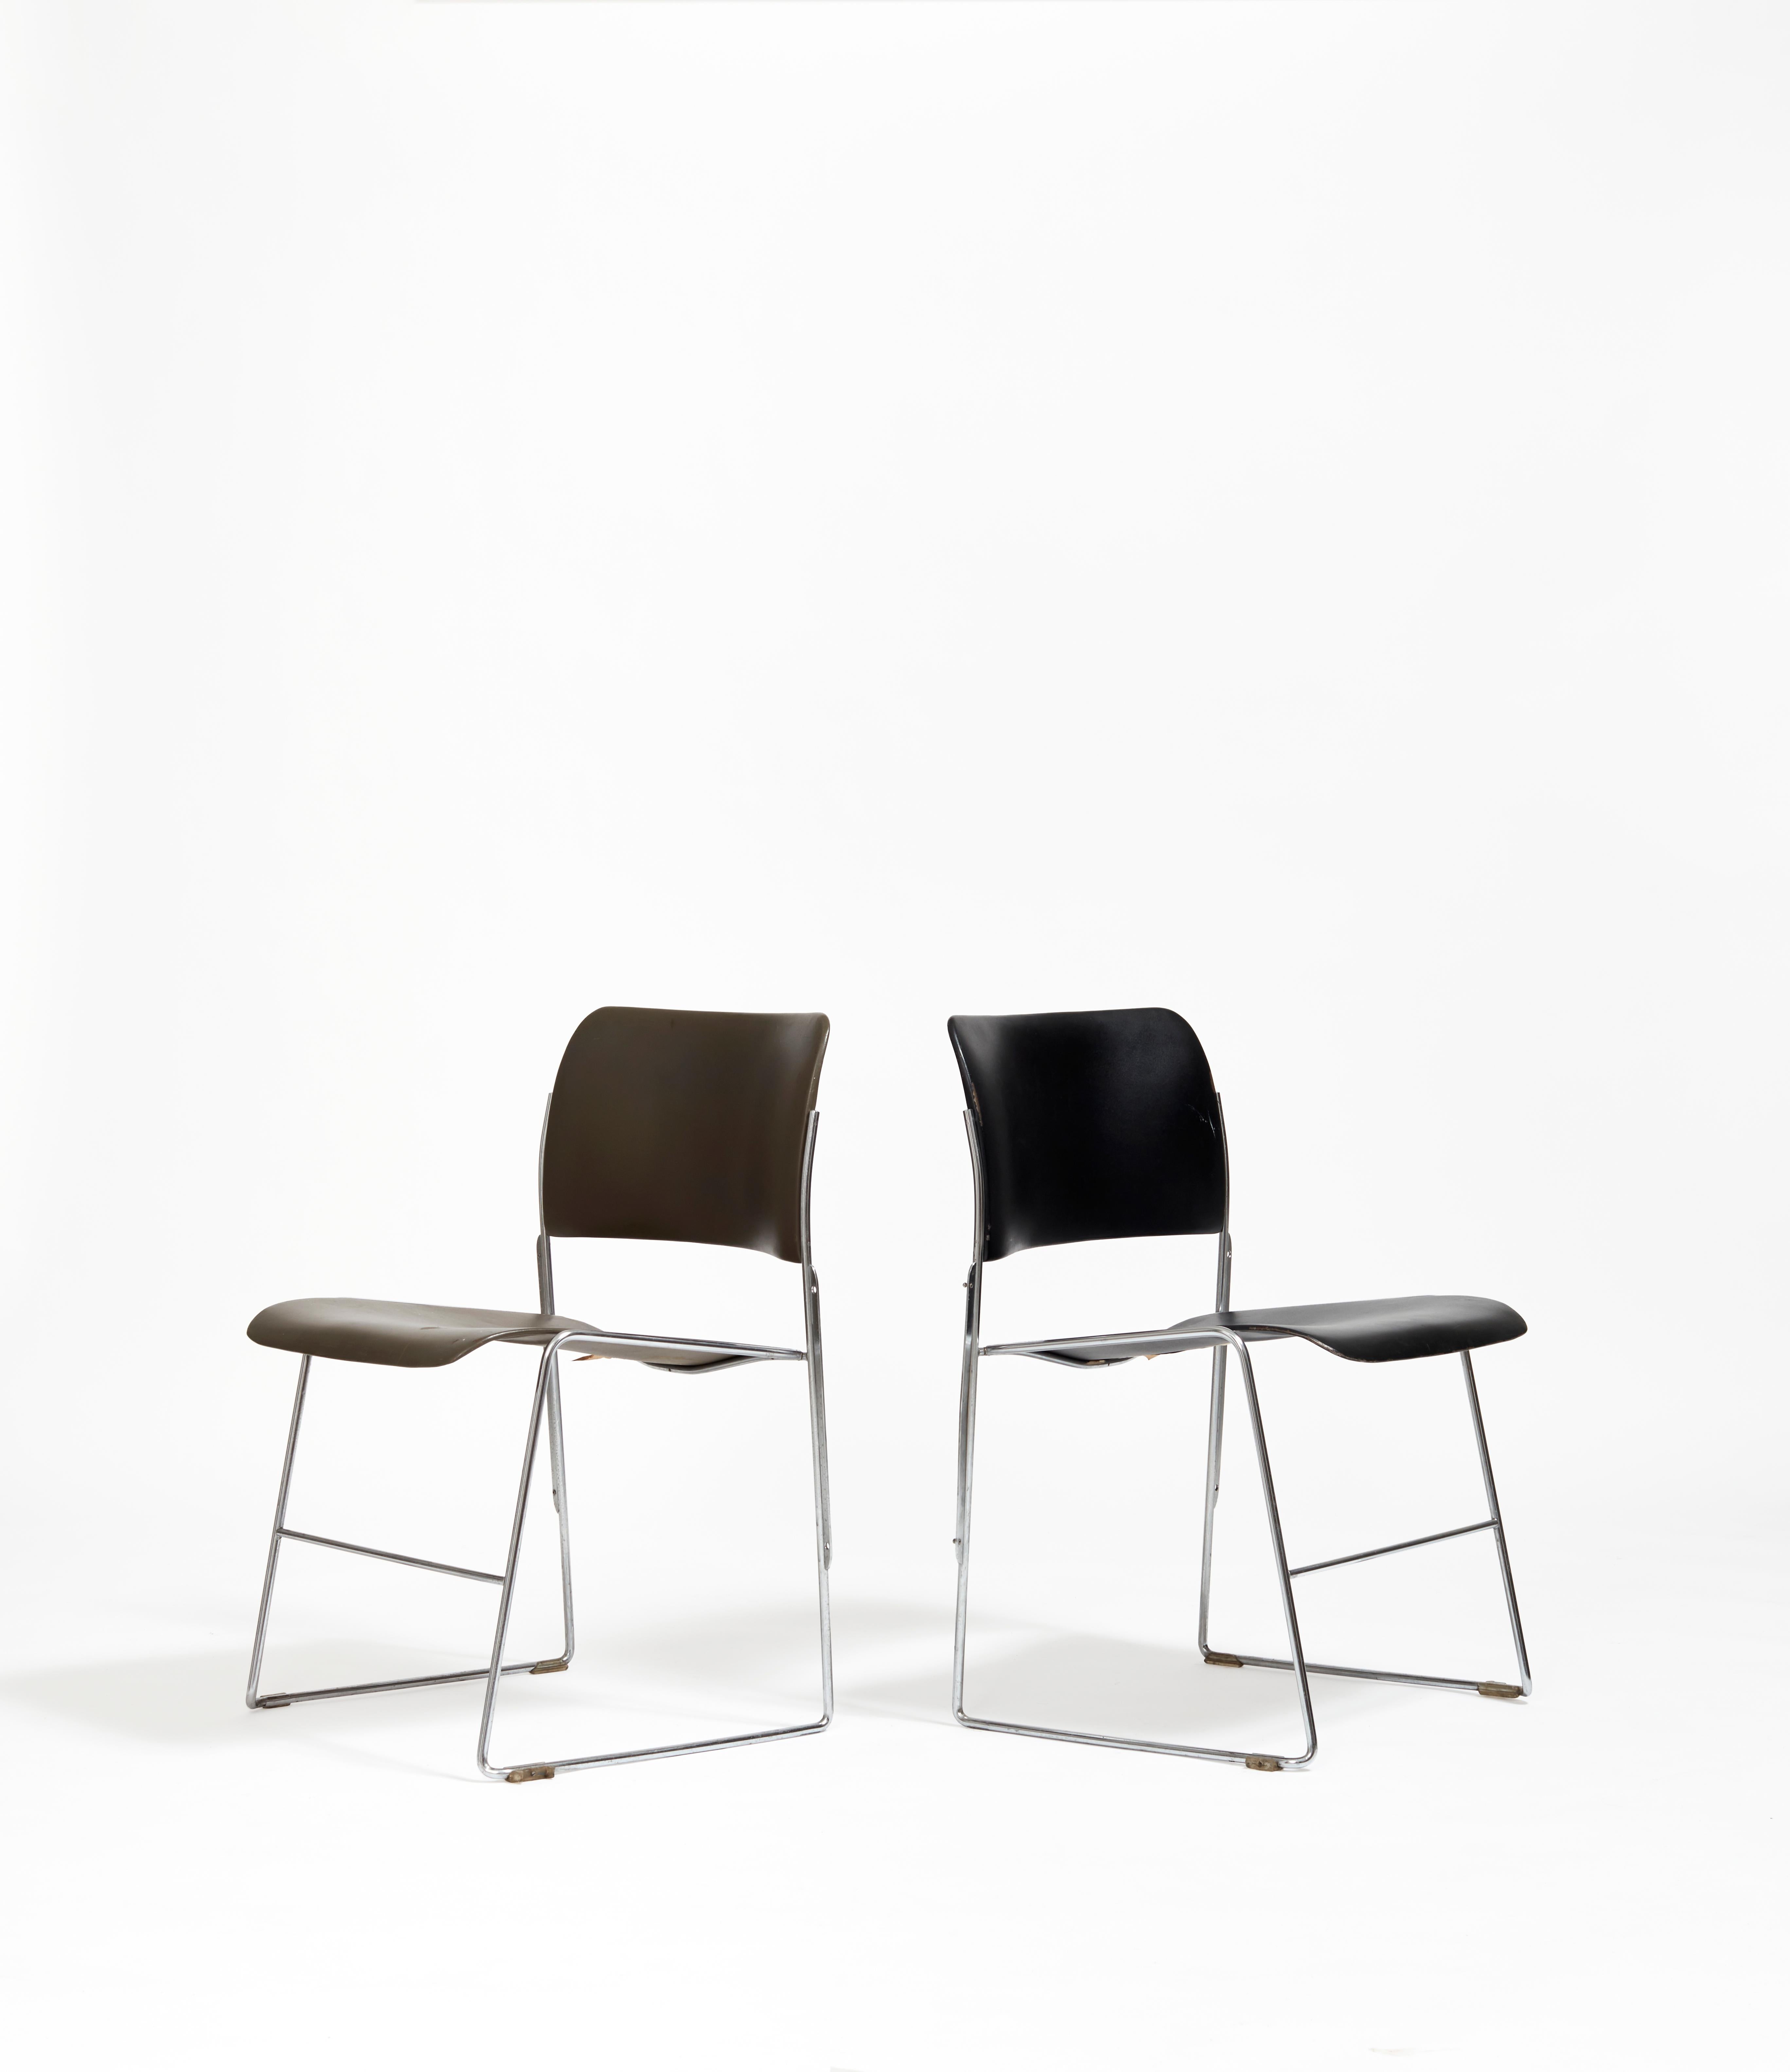 Recognised as the first truly stackable chair, the 40/4 Chair is a feat of elegance and ergonomics; encompassing the full range of multi-function that has come to challenge modernist designers in the 20th and 21st centuries.